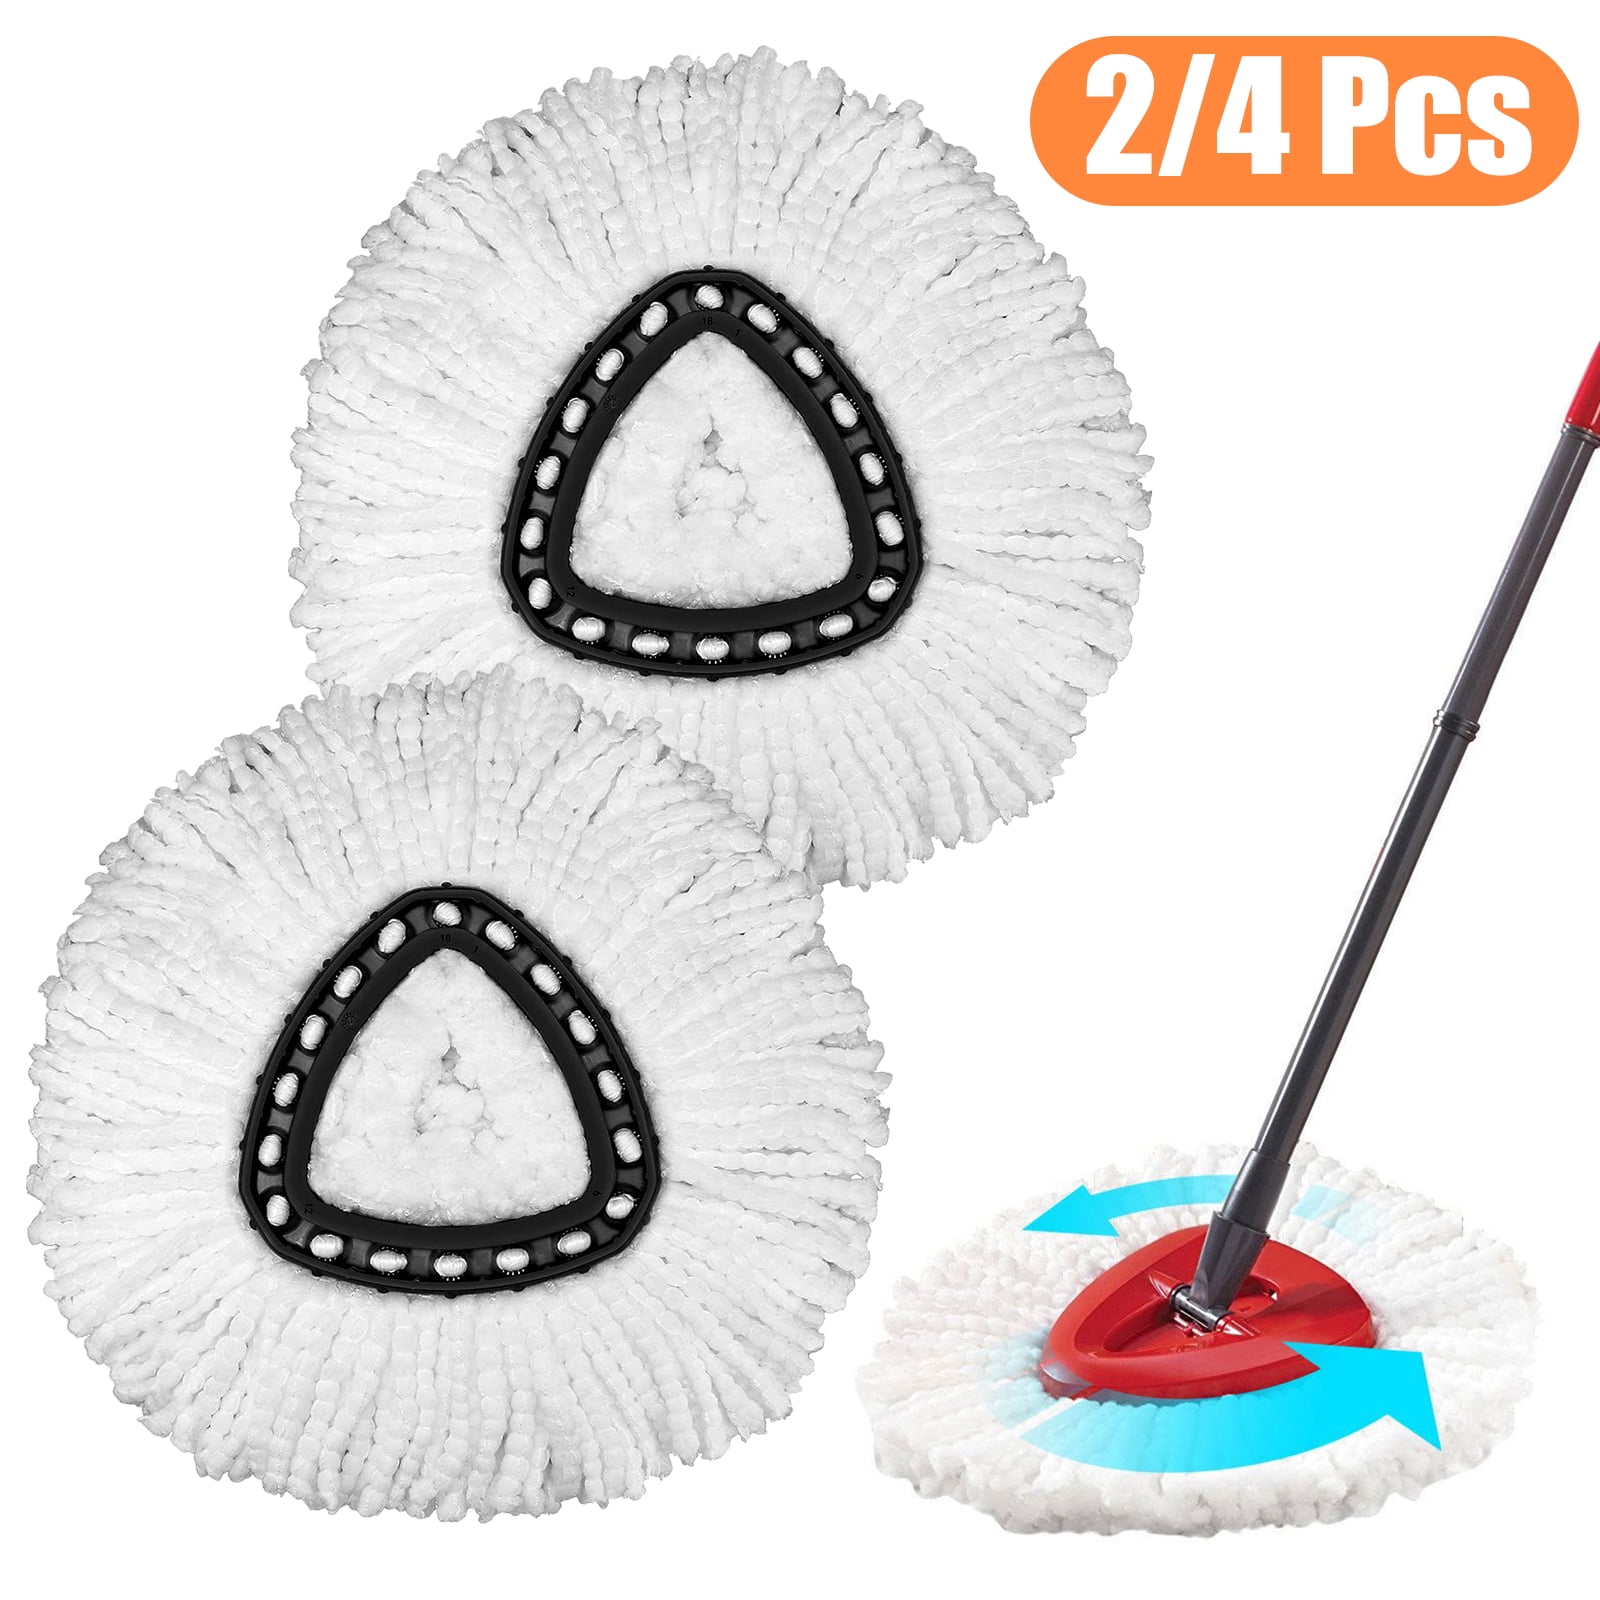 1PC Microfiber Spin Mop Clean Replacement Head for Vileda O-Cedar Easy Wring MCW